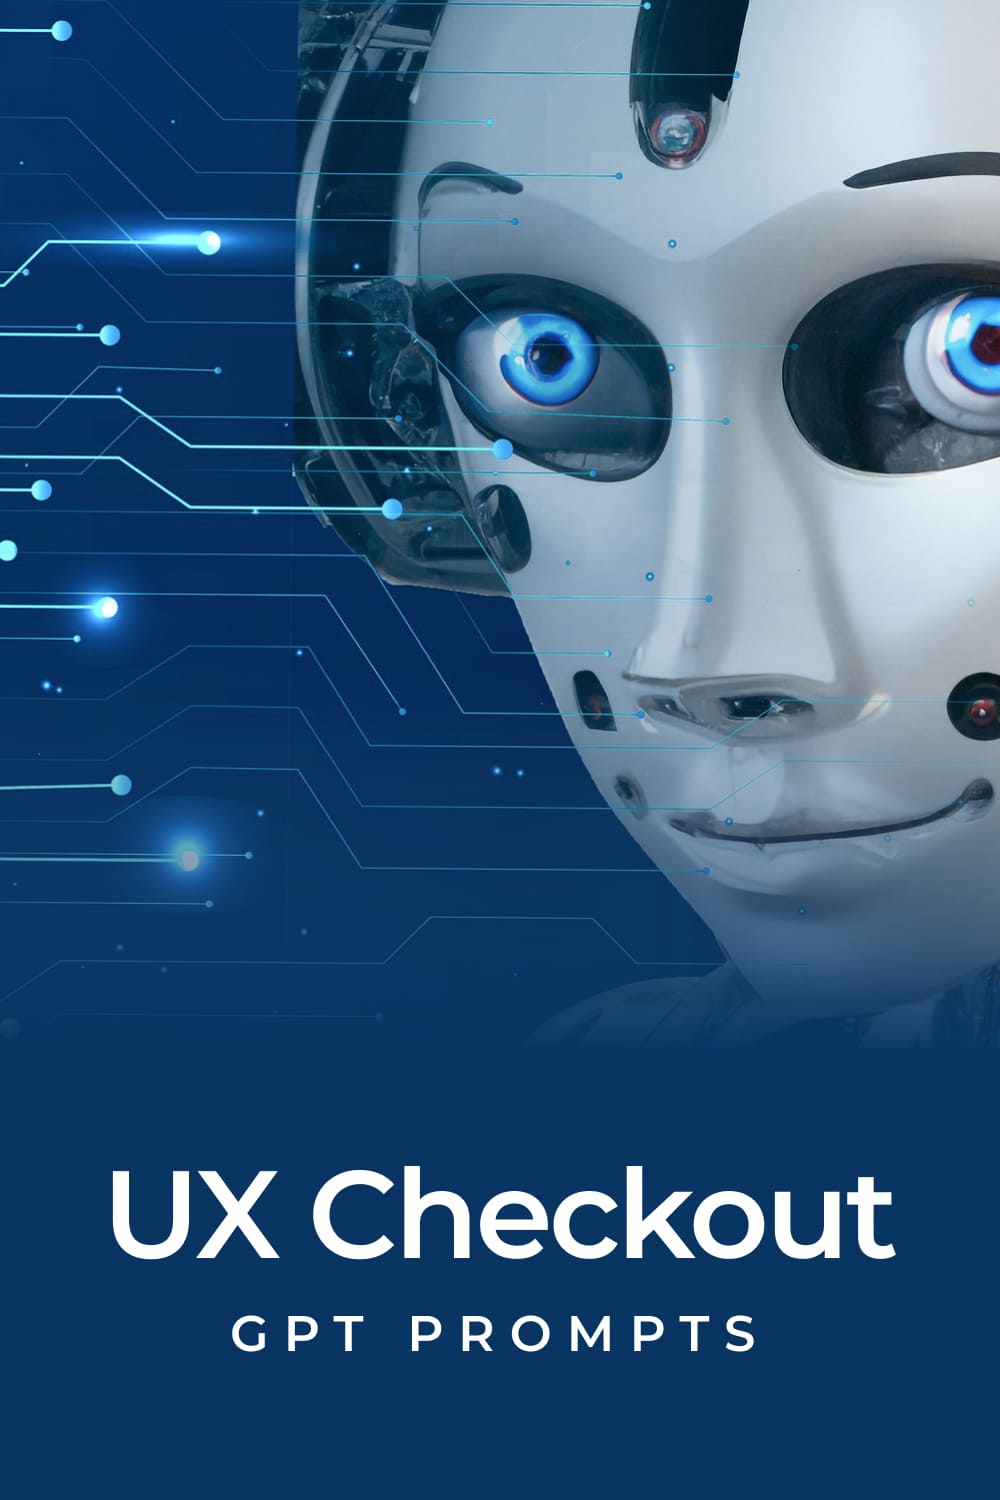 Robot face with blue eyes and the words ux checkout.